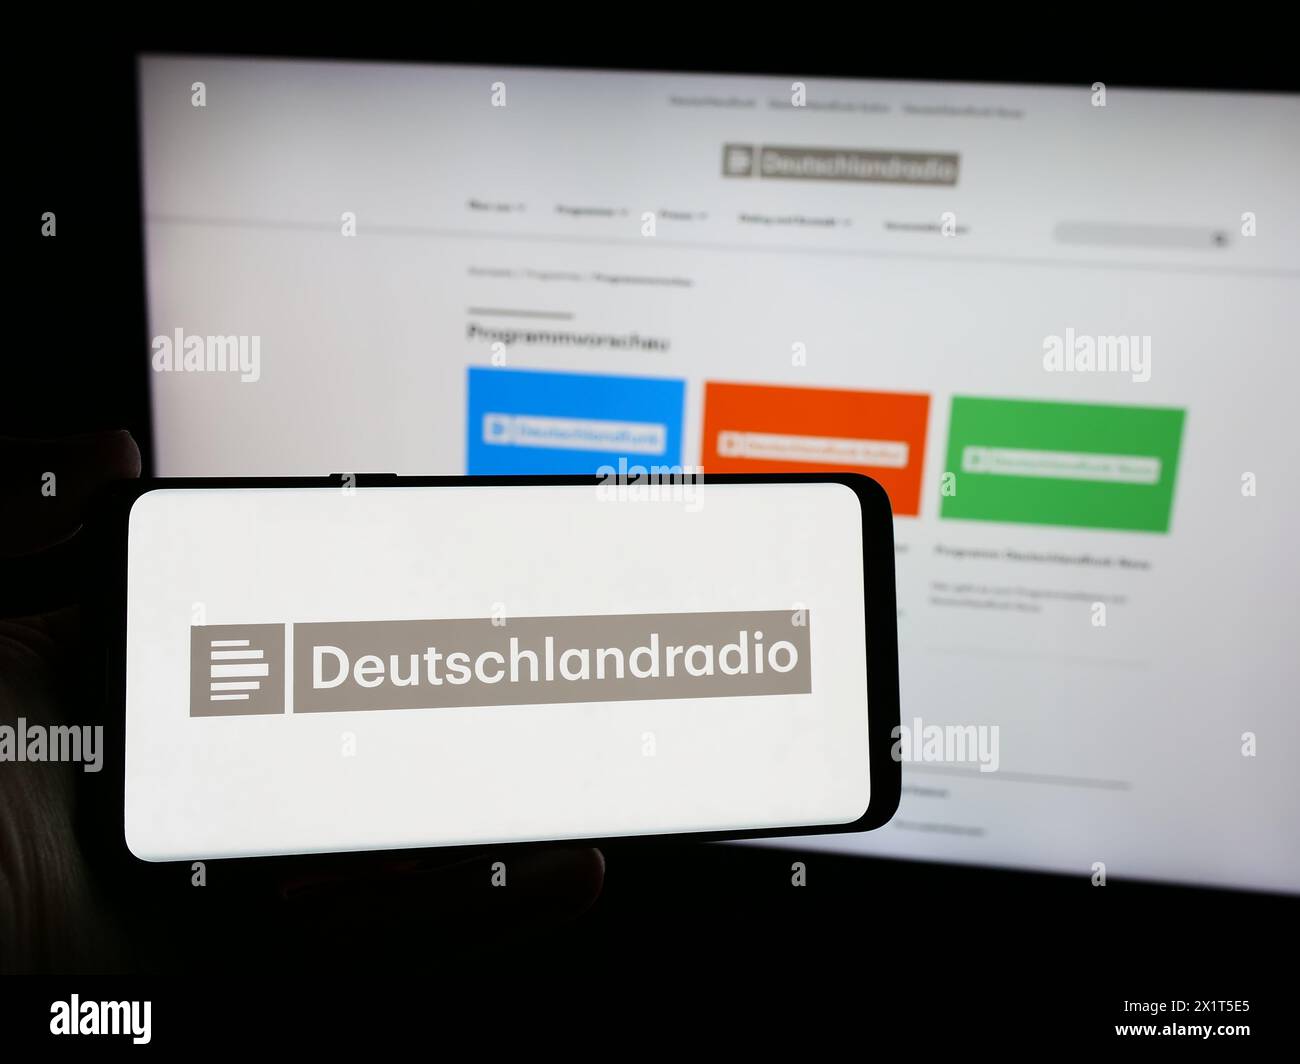 Person holding smartphone with logo of German public radio broadcaster Deutschlandradio in front of website. Focus on phone display. Stock Photo